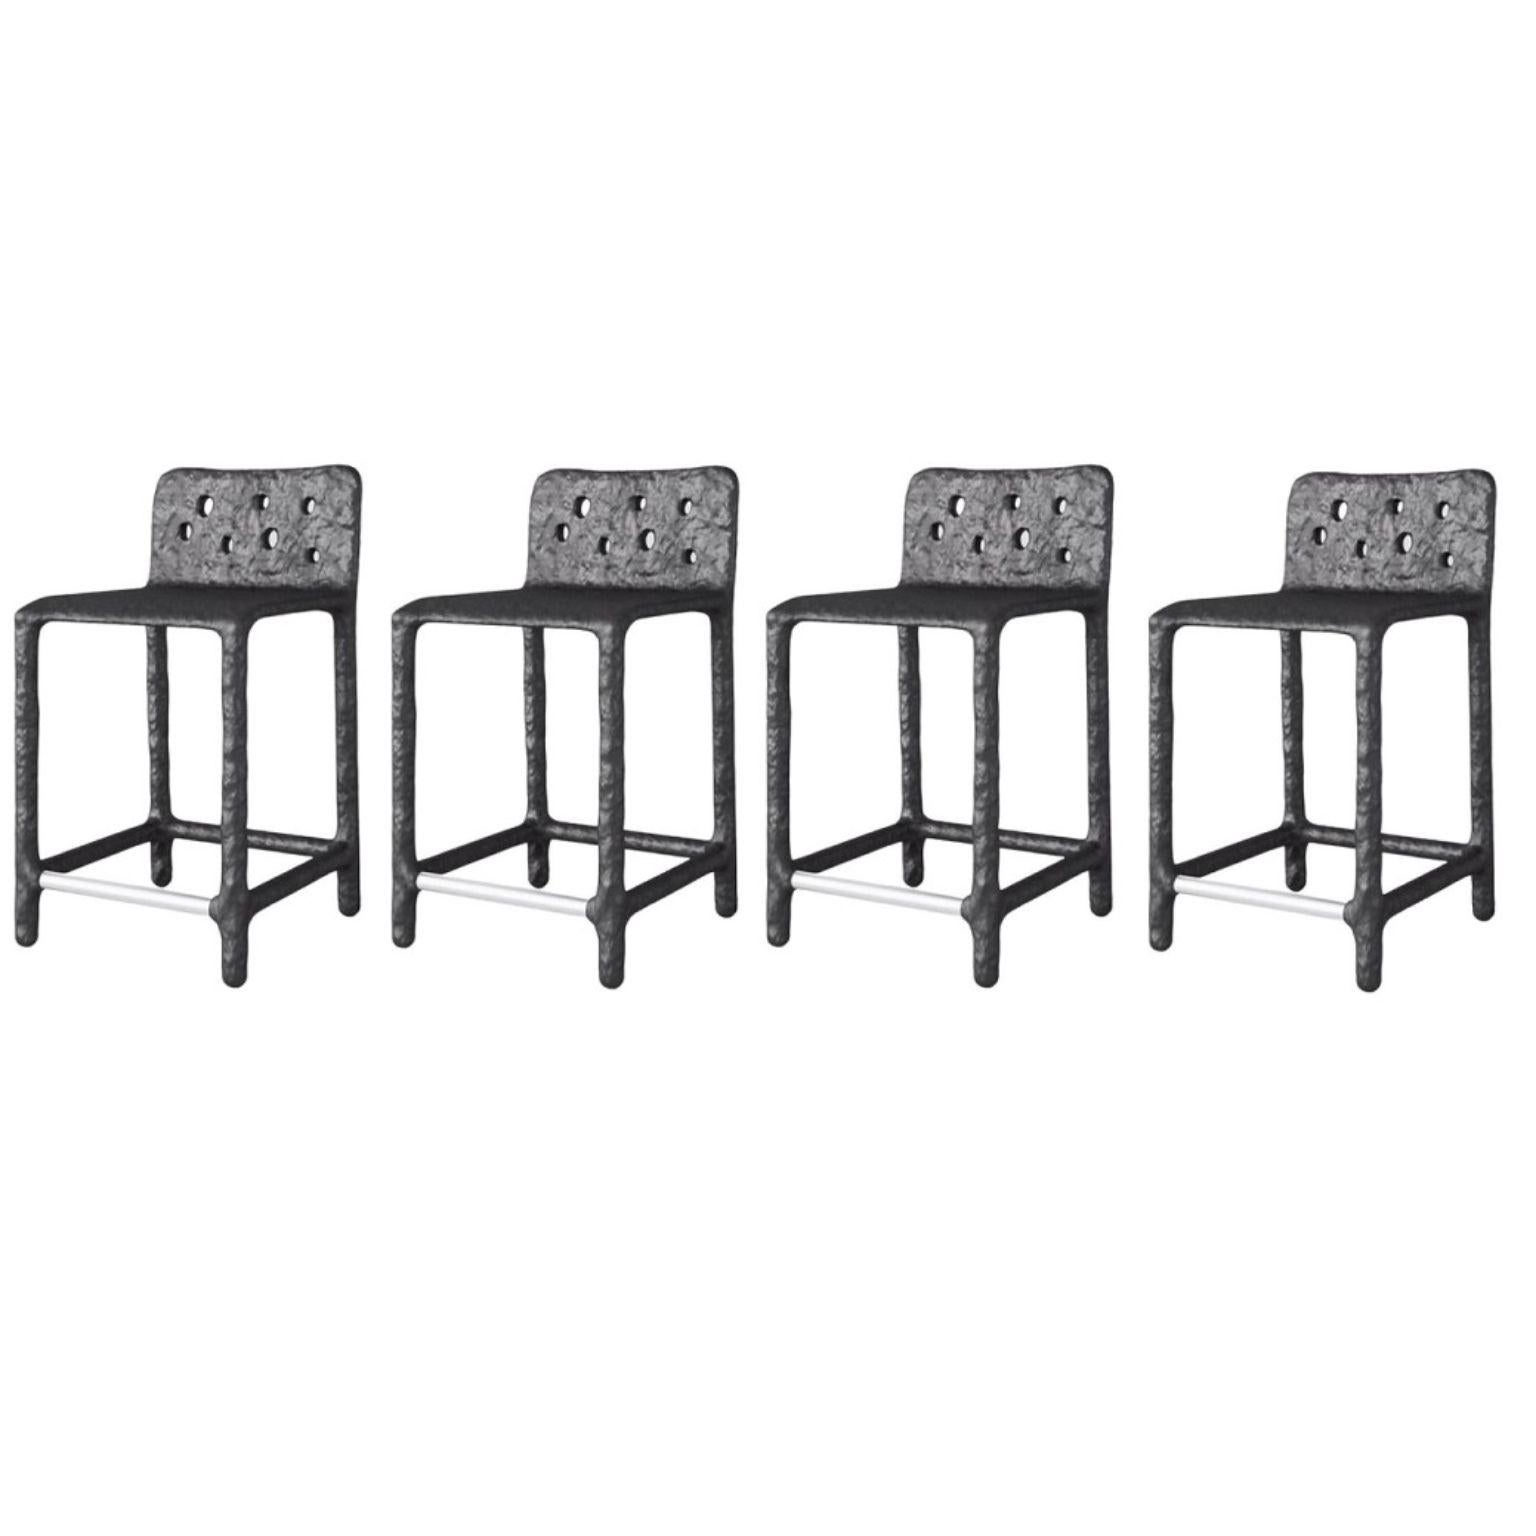 Set of 4 outdoor black sculpted contemporary half-bar stools by Faina
Design: Victoriya Yakusha
Material: steel, flax rubber, biopolymer, cellulose
Dimensions: W 46 x D 47 x H 84 cm


The plastic silhouette and slightly simple form of ZTISTA